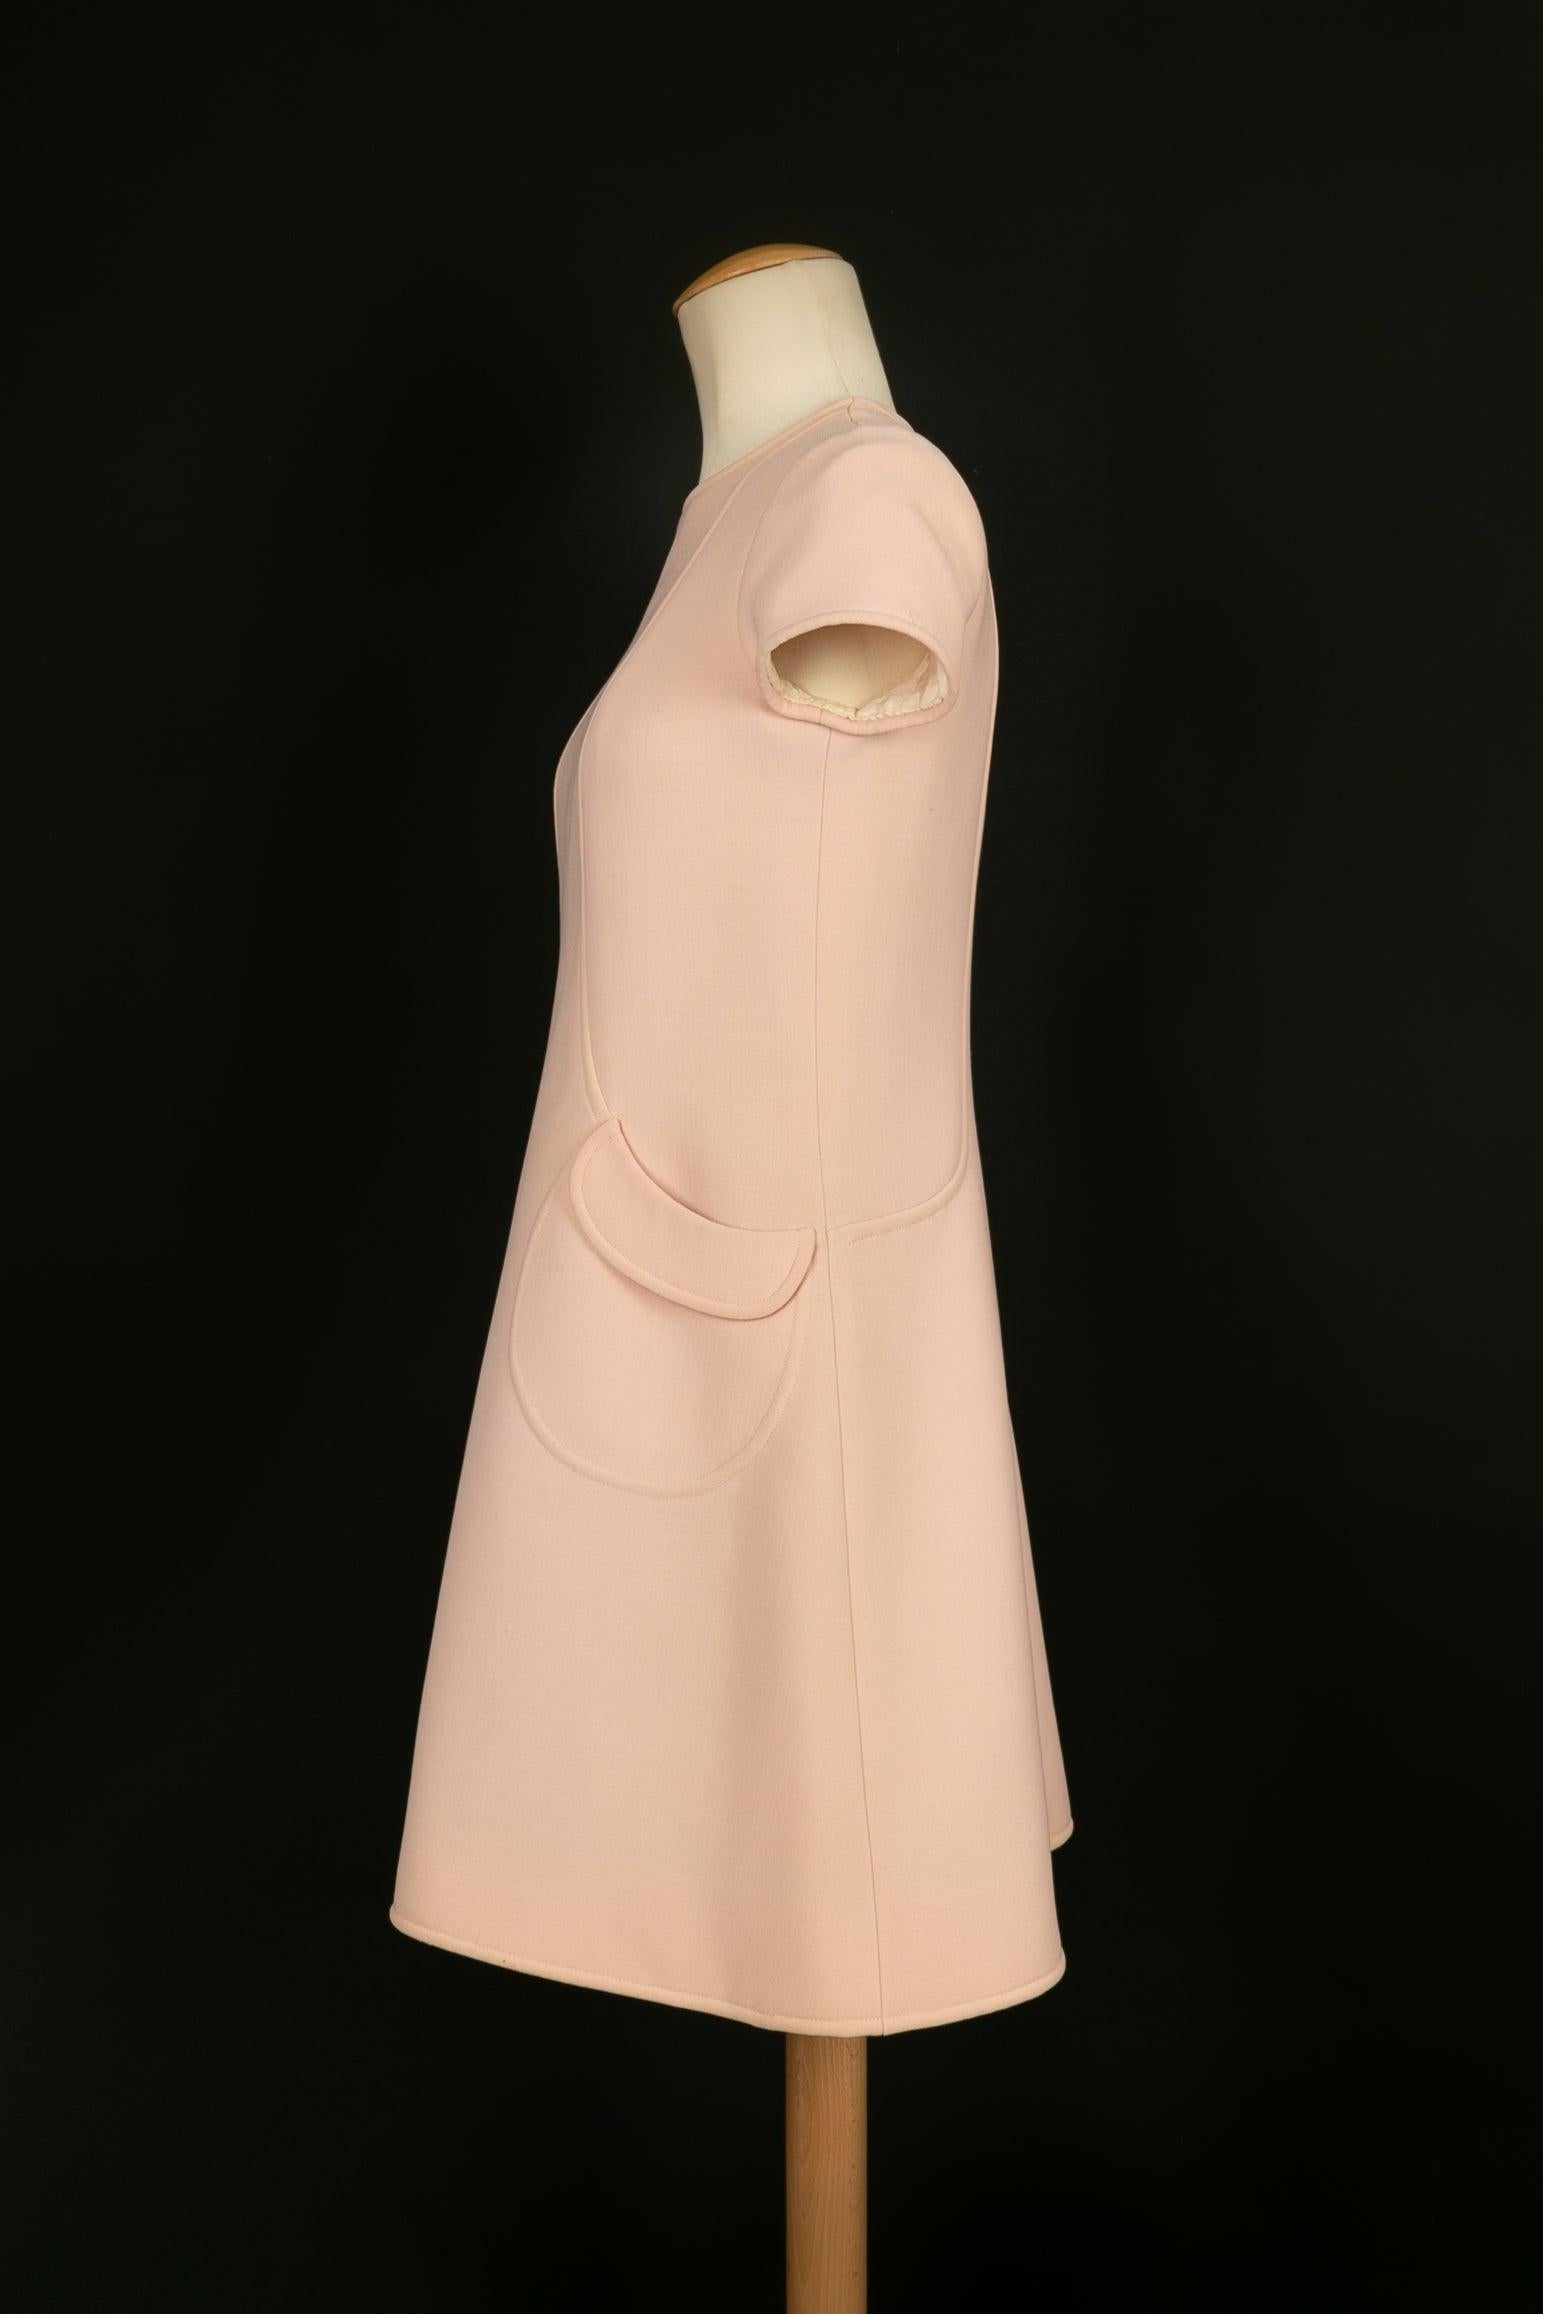 Courrèges - Light pink dress in a trapeze shape. No size tags, fits a 36FR.

Additional information:
Dimensions: Shoulder width: 36 cm, Chest: 39 cm, Sleeve length: 15 cm, Length: 90 cm
Condition: Very good condition
Seller Ref number: VR139